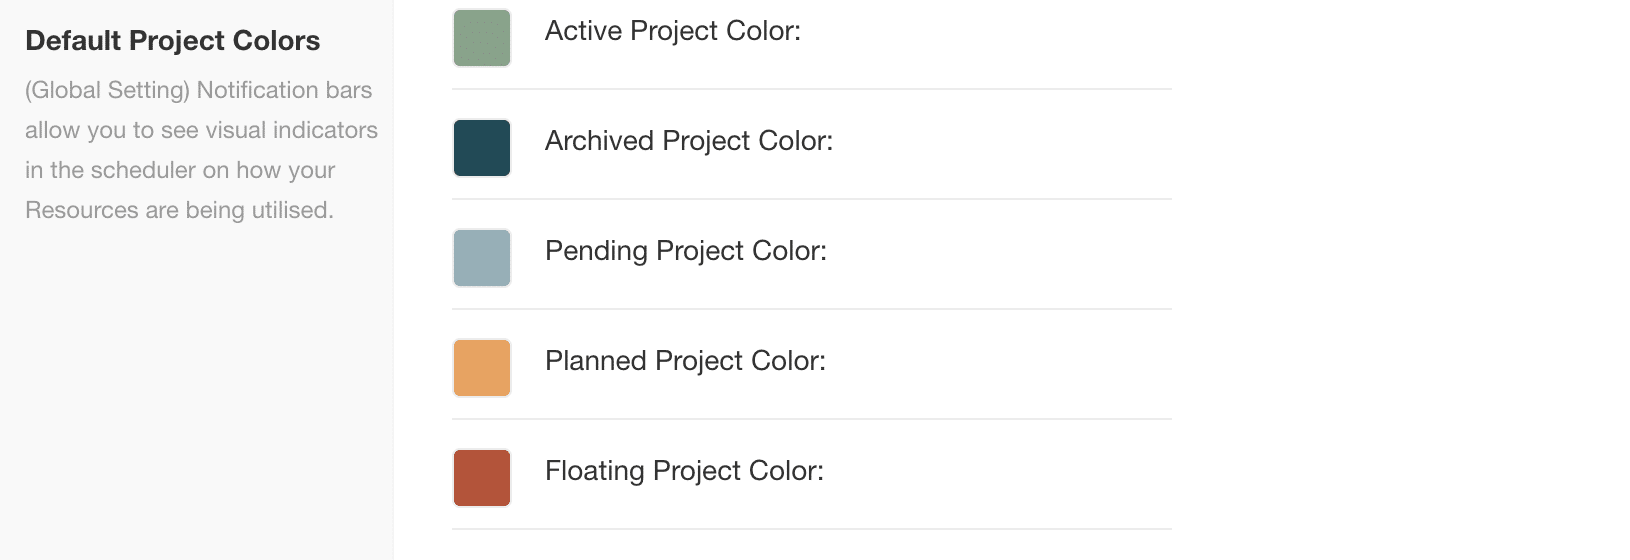 Display Colors of Proects